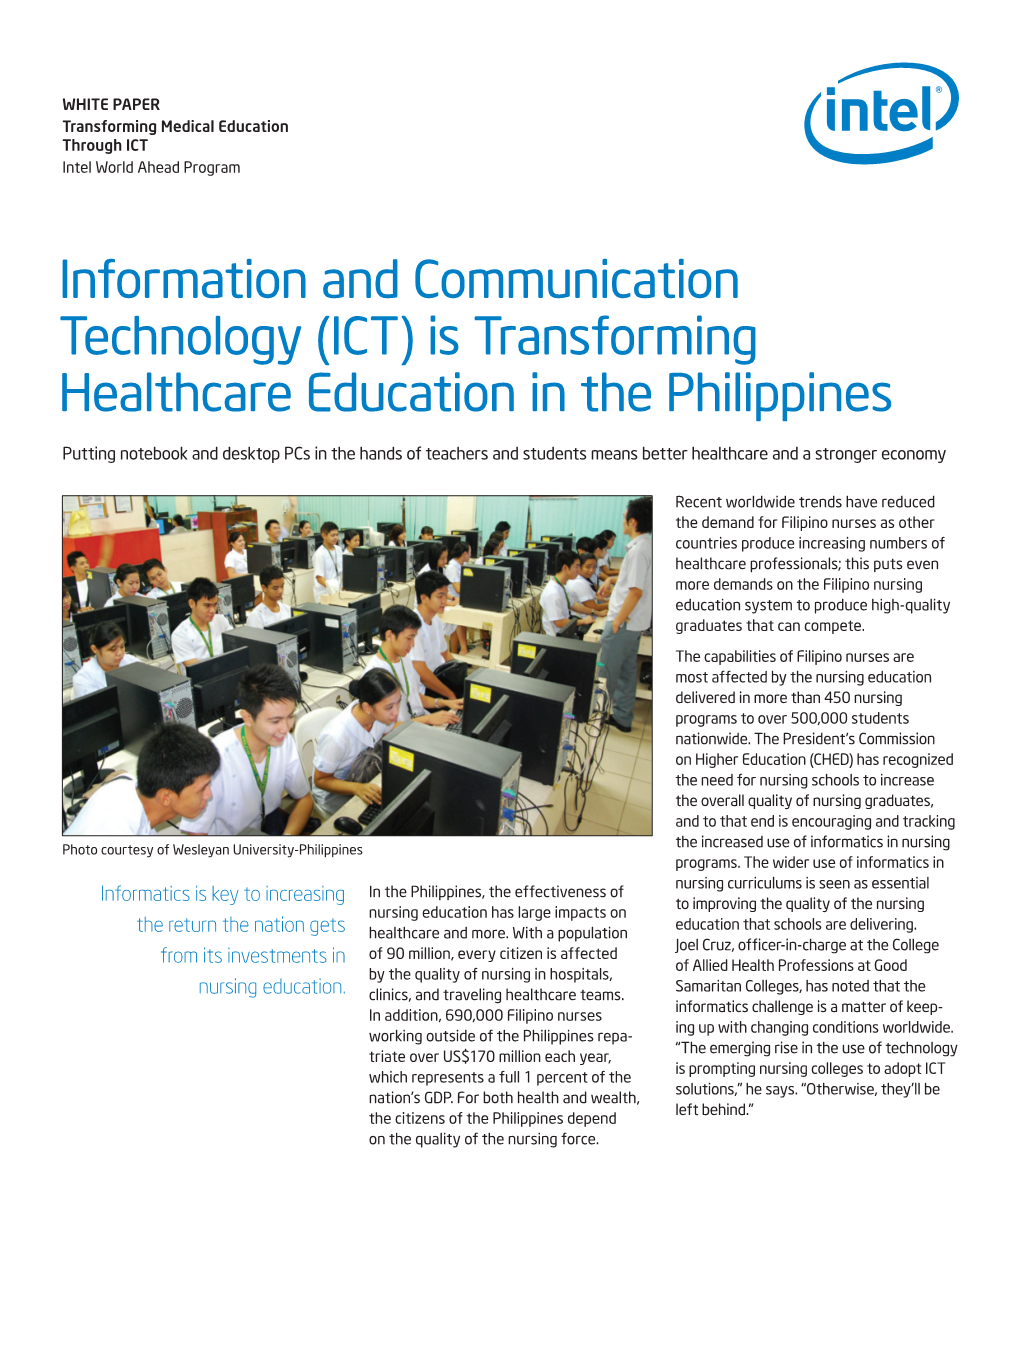 (ICT) Is Transforming Healthcare Education in the Philippines